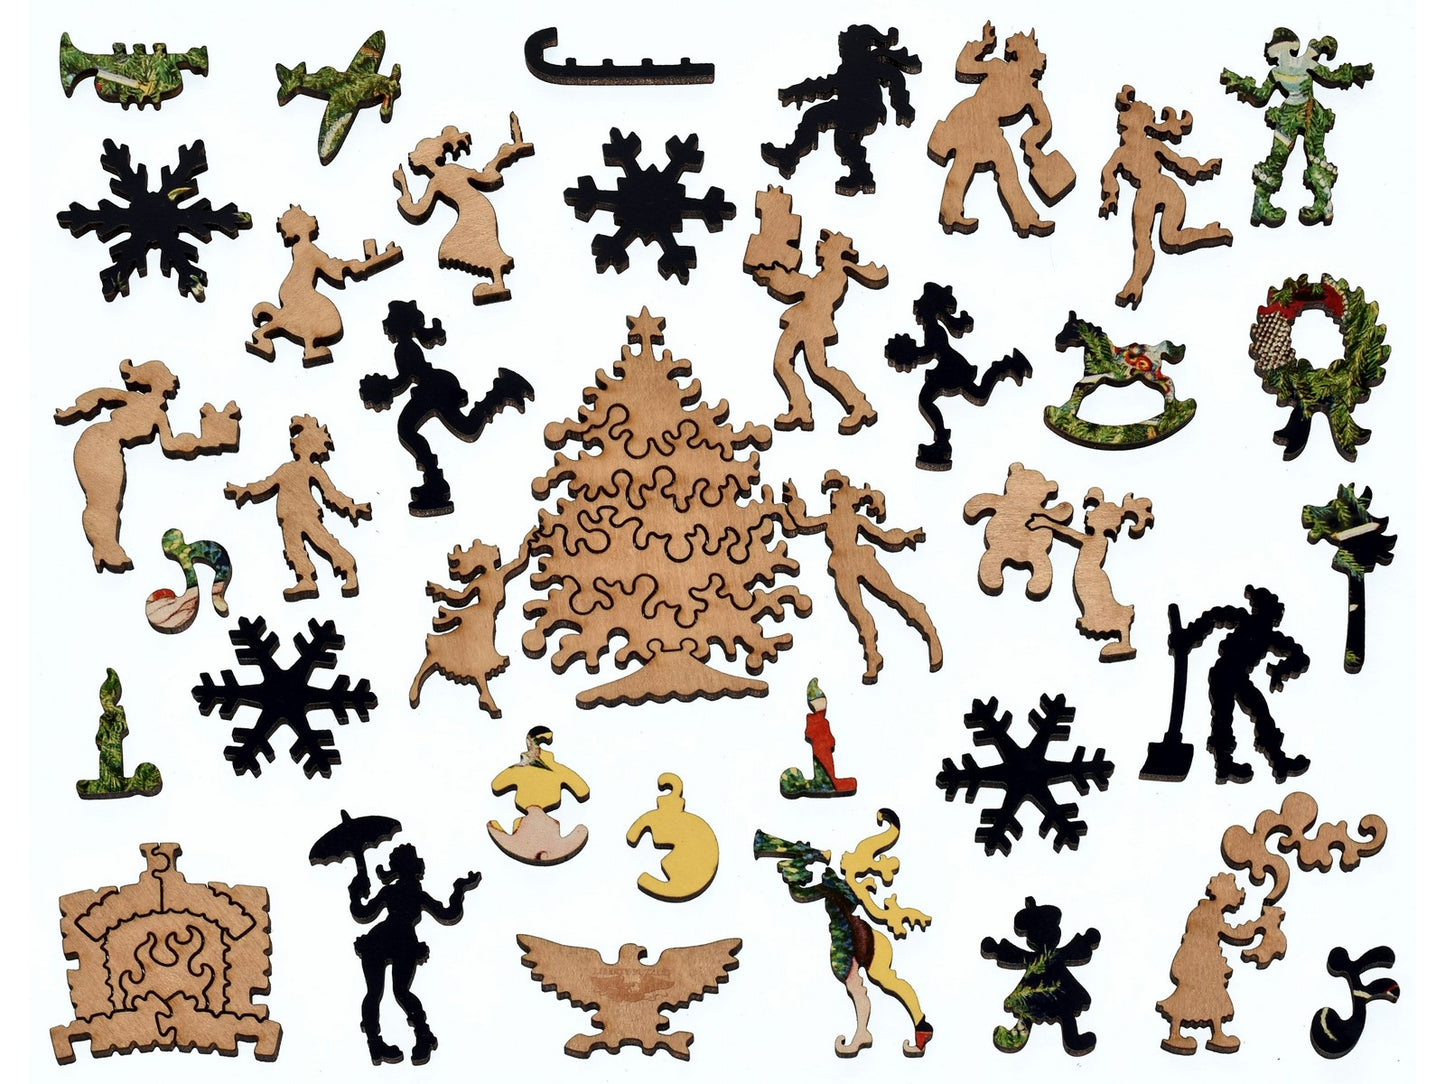 The whimsies that can be found in the puzzle, Vogue Christmas Gifts Number.